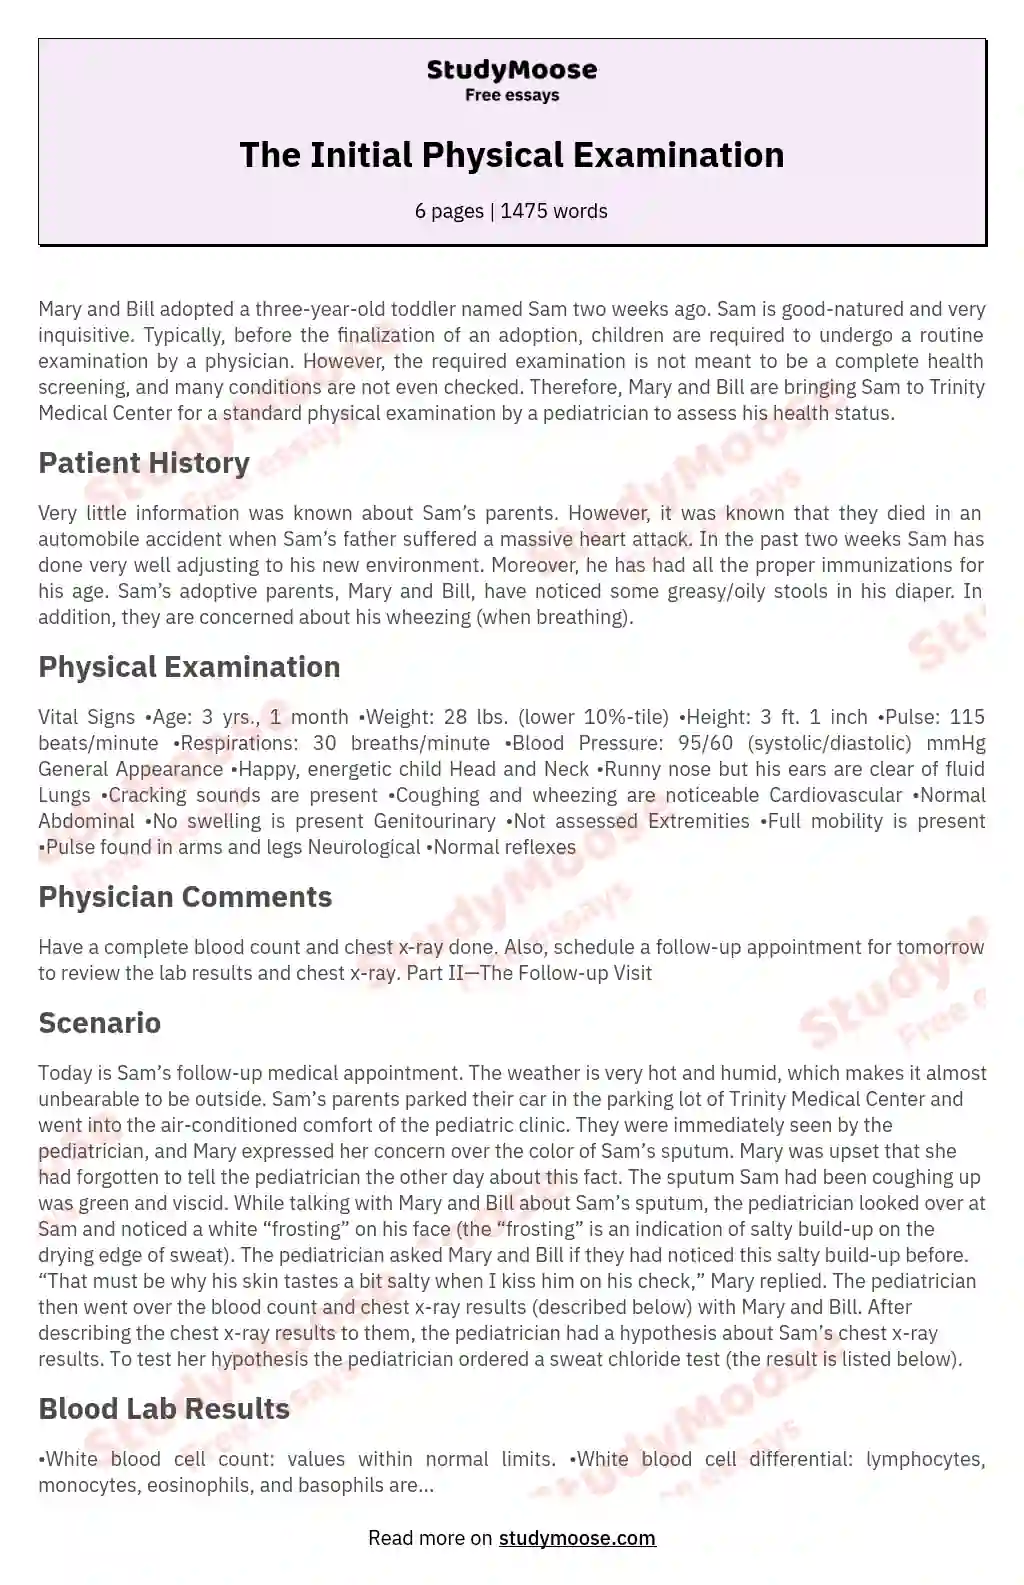 The Initial Physical Examination essay